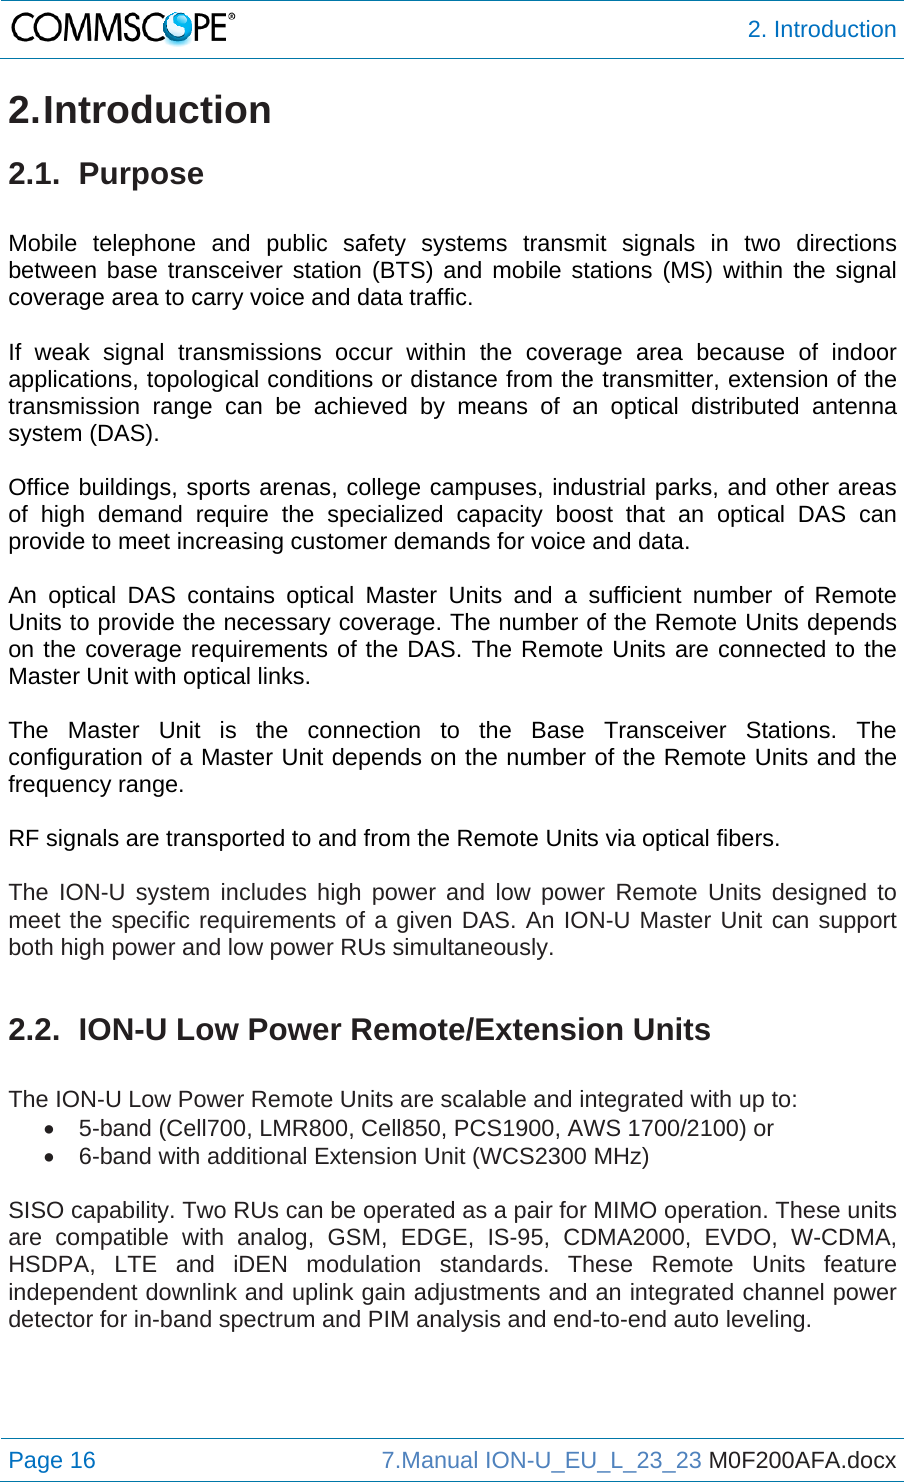  2. Introduction Page 16  7.Manual ION-U_EU_L_23_23 M0F200AFA.docx  2. Introduction 2.1. Purpose  Mobile telephone and public safety systems transmit signals in two directions between base transceiver station (BTS) and mobile stations (MS) within the signal coverage area to carry voice and data traffic.  If weak signal transmissions occur within the coverage area because of indoor applications, topological conditions or distance from the transmitter, extension of the transmission range can be achieved by means of an optical distributed antenna system (DAS).  Office buildings, sports arenas, college campuses, industrial parks, and other areas of high demand require the specialized capacity boost that an optical DAS can provide to meet increasing customer demands for voice and data.  An optical DAS contains optical Master Units and a sufficient number of Remote Units to provide the necessary coverage. The number of the Remote Units depends on the coverage requirements of the DAS. The Remote Units are connected to the Master Unit with optical links.  The Master Unit is the connection to the Base Transceiver Stations. The configuration of a Master Unit depends on the number of the Remote Units and the frequency range.  RF signals are transported to and from the Remote Units via optical fibers.  The ION-U system includes high power and low power Remote Units designed to meet the specific requirements of a given DAS. An ION-U Master Unit can support both high power and low power RUs simultaneously.  2.2.  ION-U Low Power Remote/Extension Units  The ION-U Low Power Remote Units are scalable and integrated with up to:   5-band (Cell700, LMR800, Cell850, PCS1900, AWS 1700/2100) or   6-band with additional Extension Unit (WCS2300 MHz)  SISO capability. Two RUs can be operated as a pair for MIMO operation. These units are compatible with analog, GSM, EDGE, IS-95, CDMA2000, EVDO, W-CDMA, HSDPA, LTE and iDEN modulation standards. These Remote Units feature independent downlink and uplink gain adjustments and an integrated channel power detector for in-band spectrum and PIM analysis and end-to-end auto leveling.   